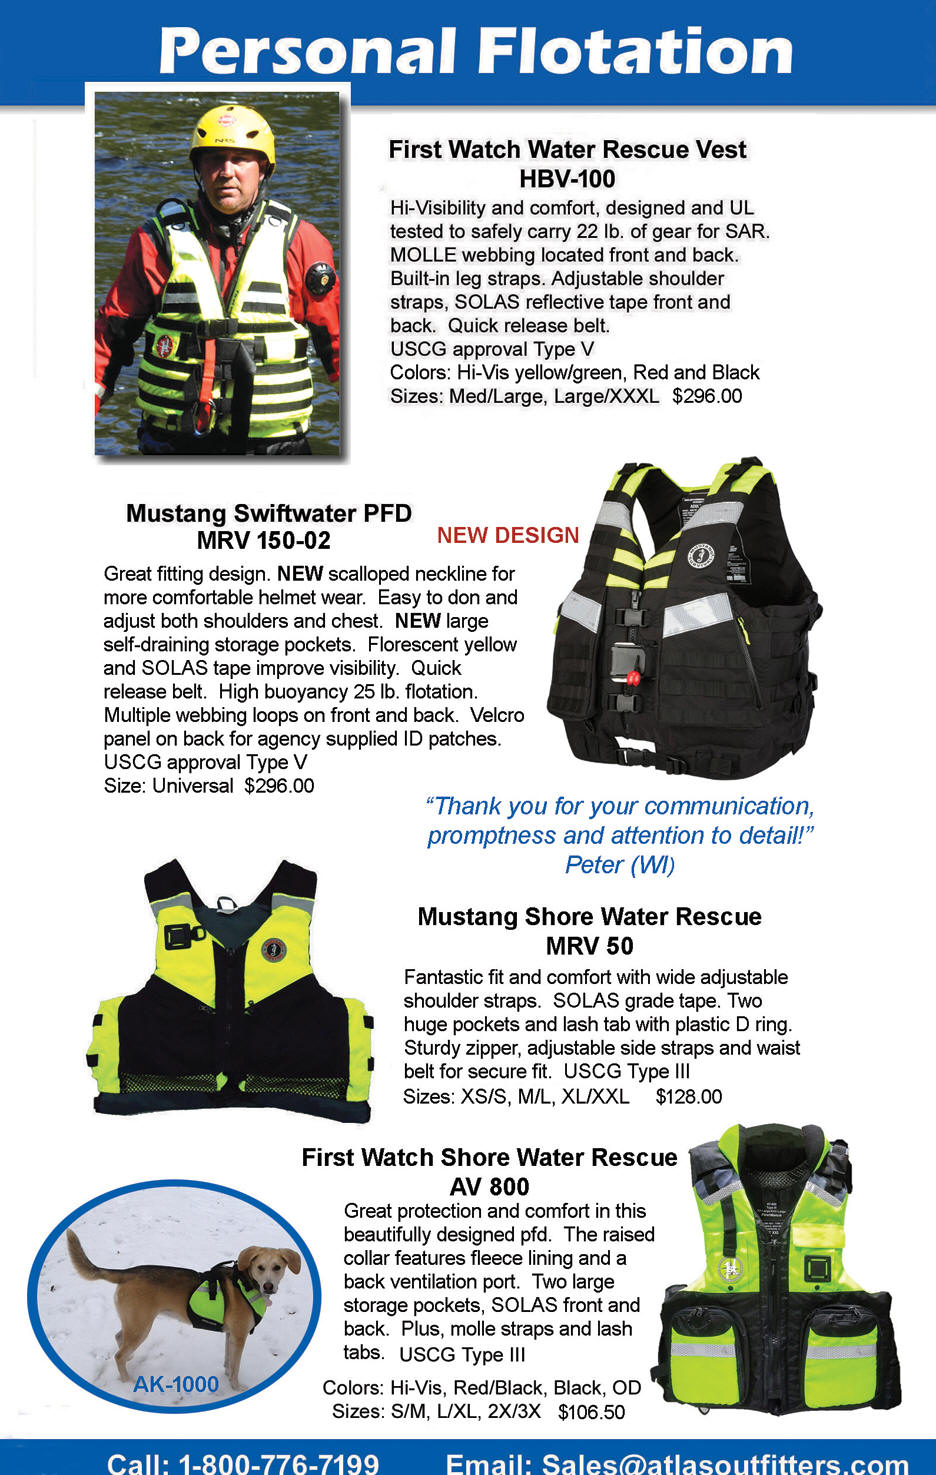 Water rescue pfds for swiftwater and shore